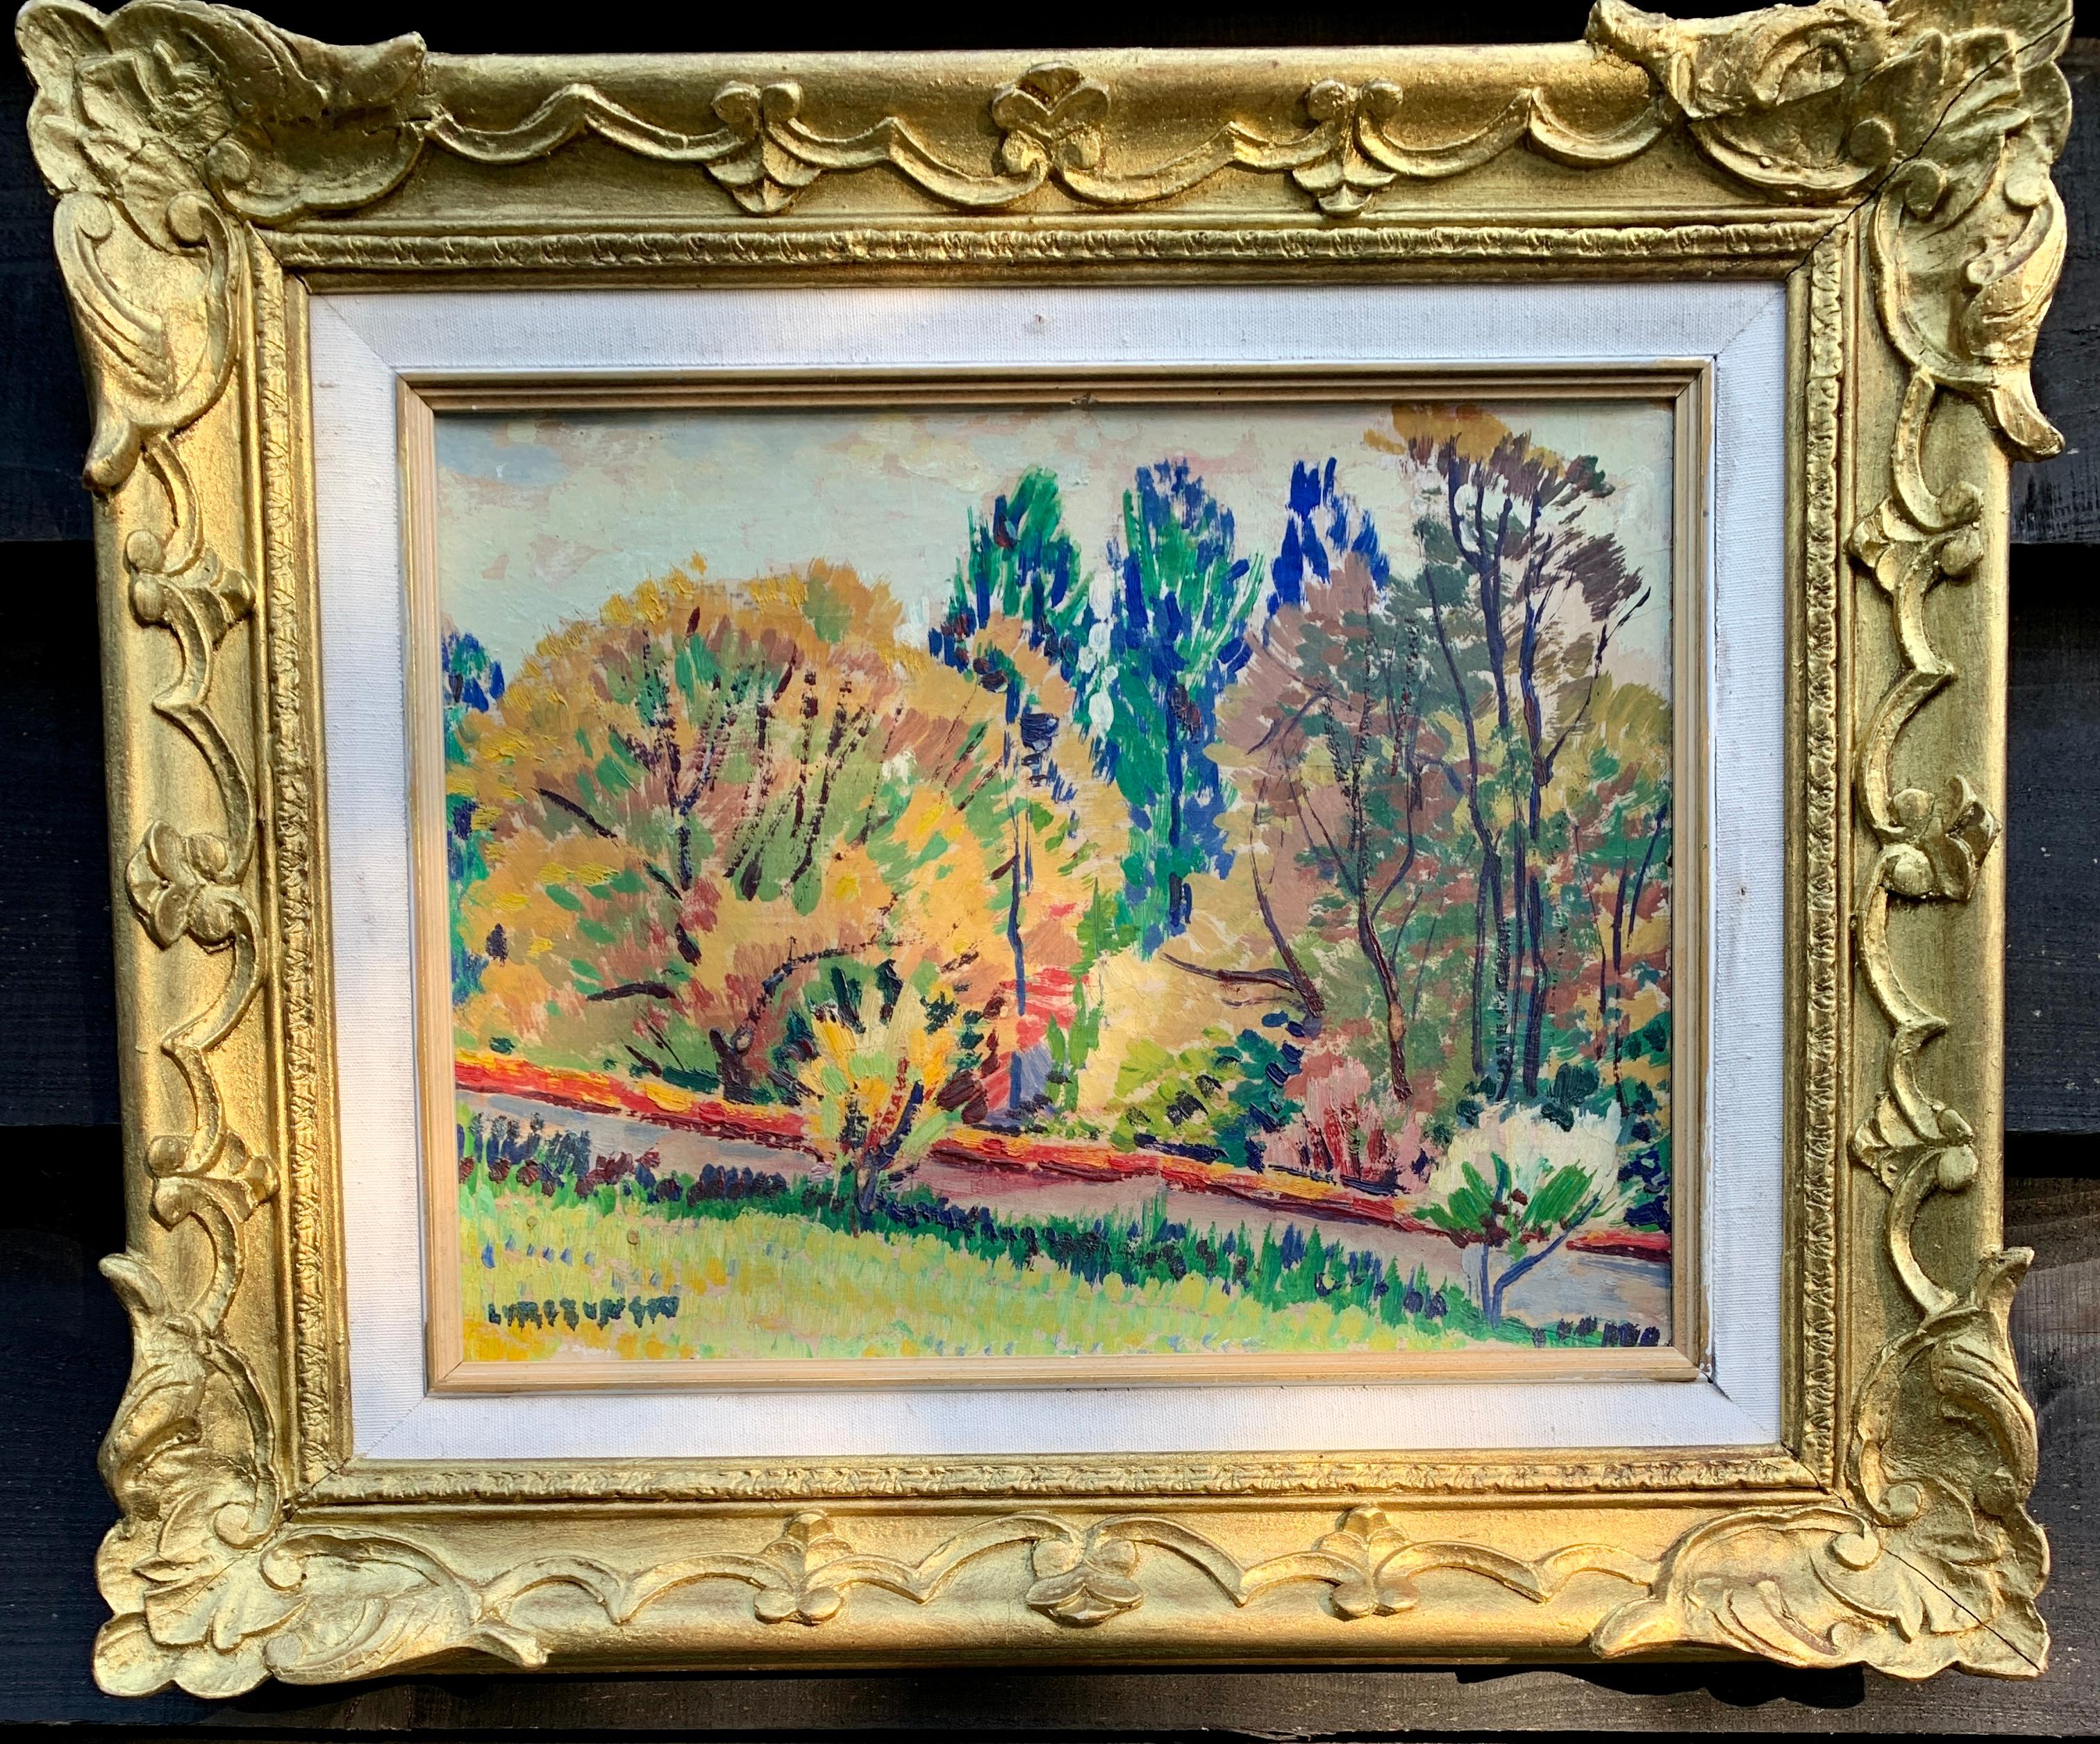 Unknown Figurative Painting - Mid Century French/European school, impressionist landscape with trees